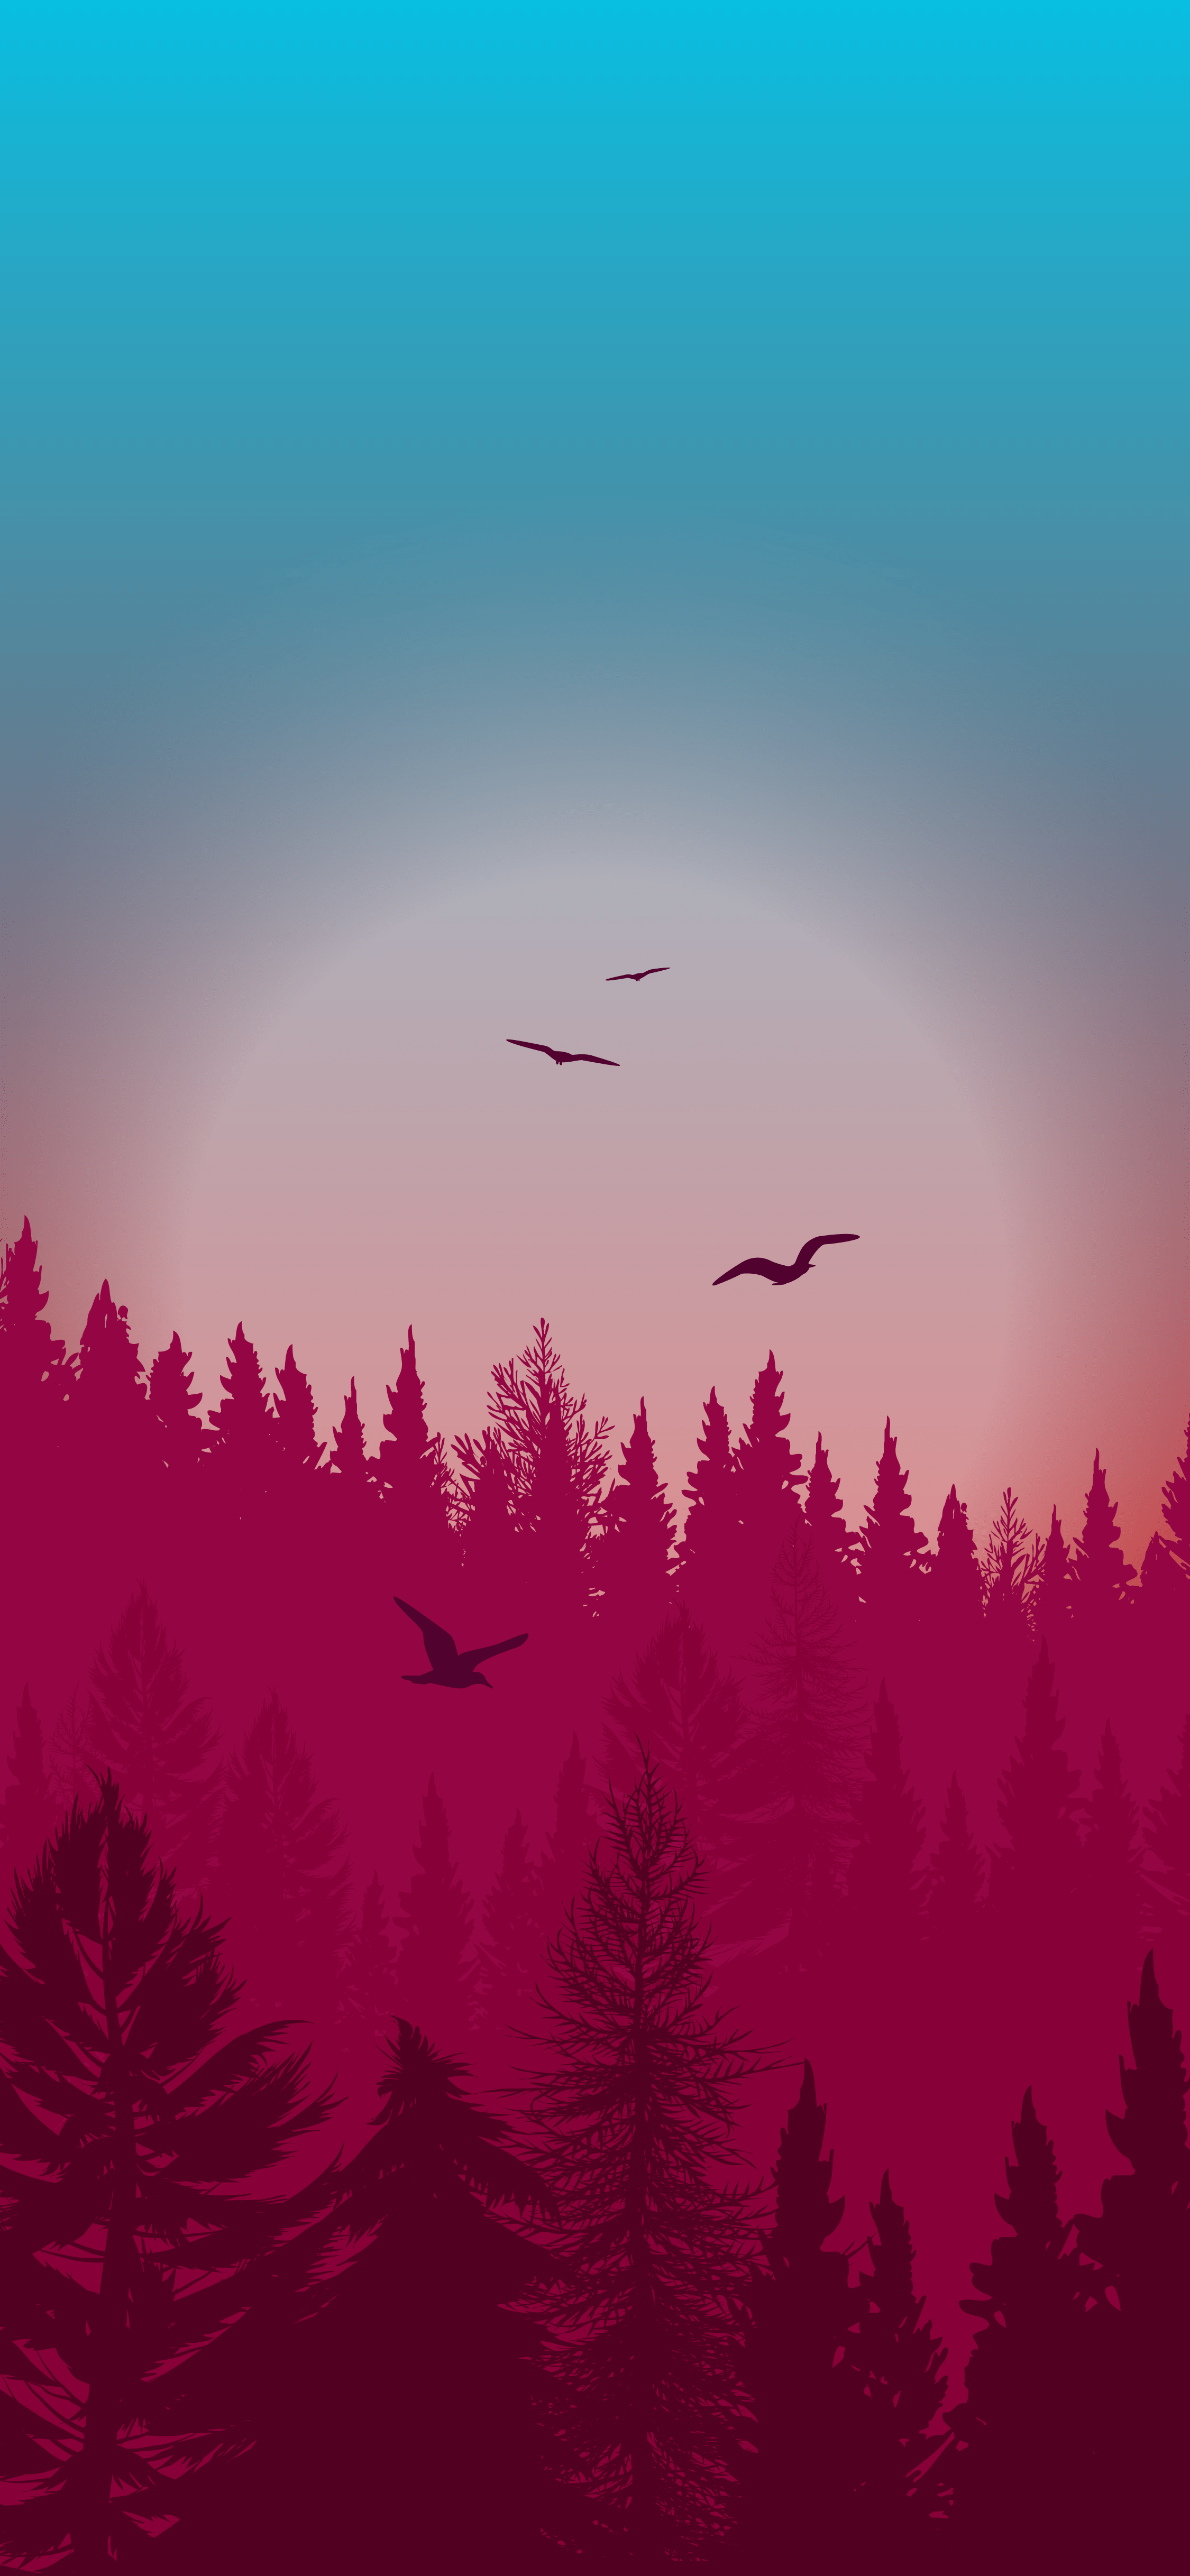 A landscape illustration of a forest with birds flying in the sky - Forest, beautiful